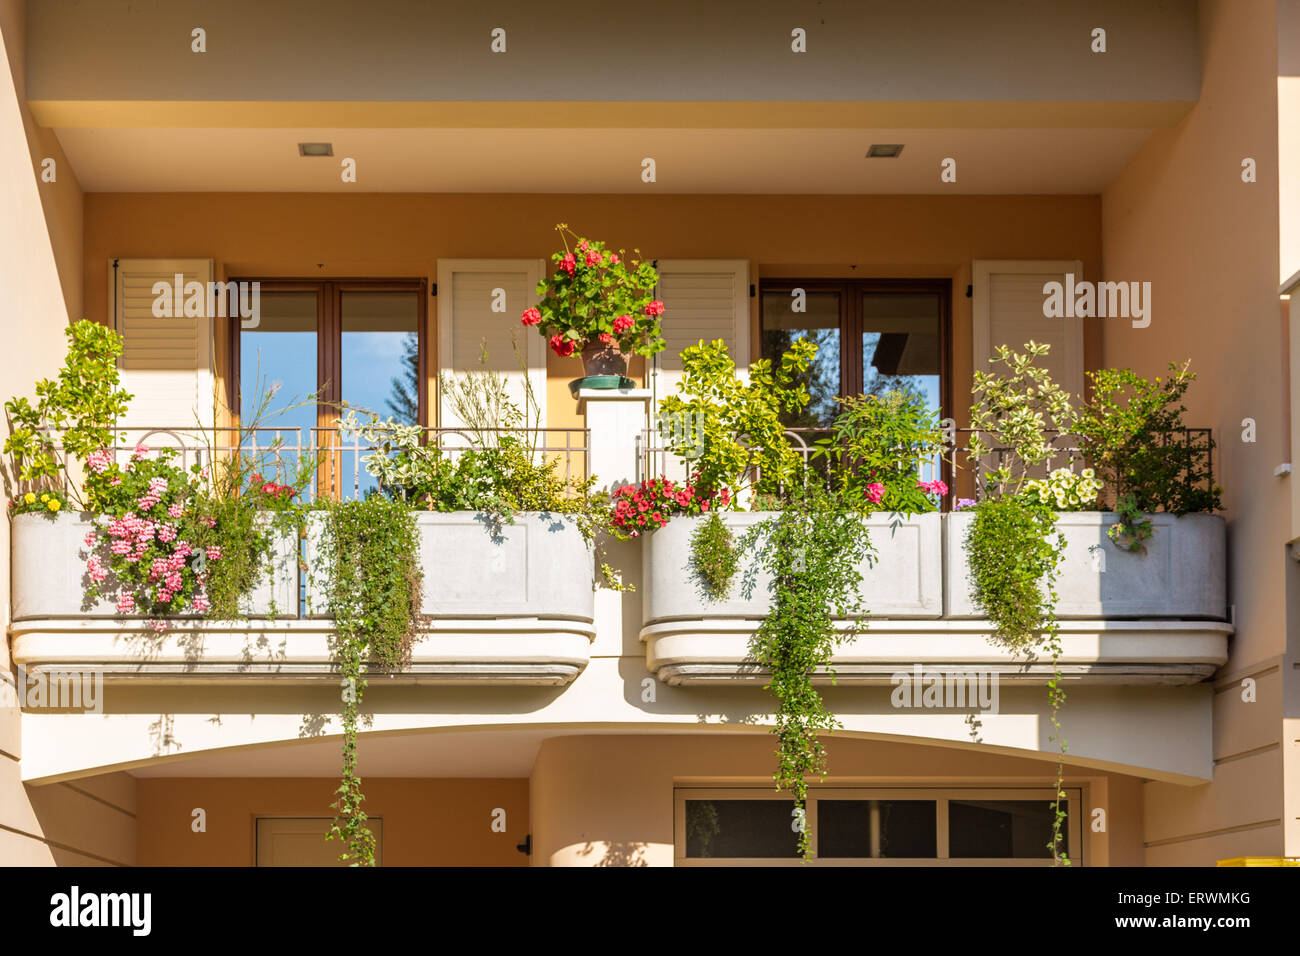 window with iron grating and flower pots: red and pink geranium, white  petunias Stock Photo